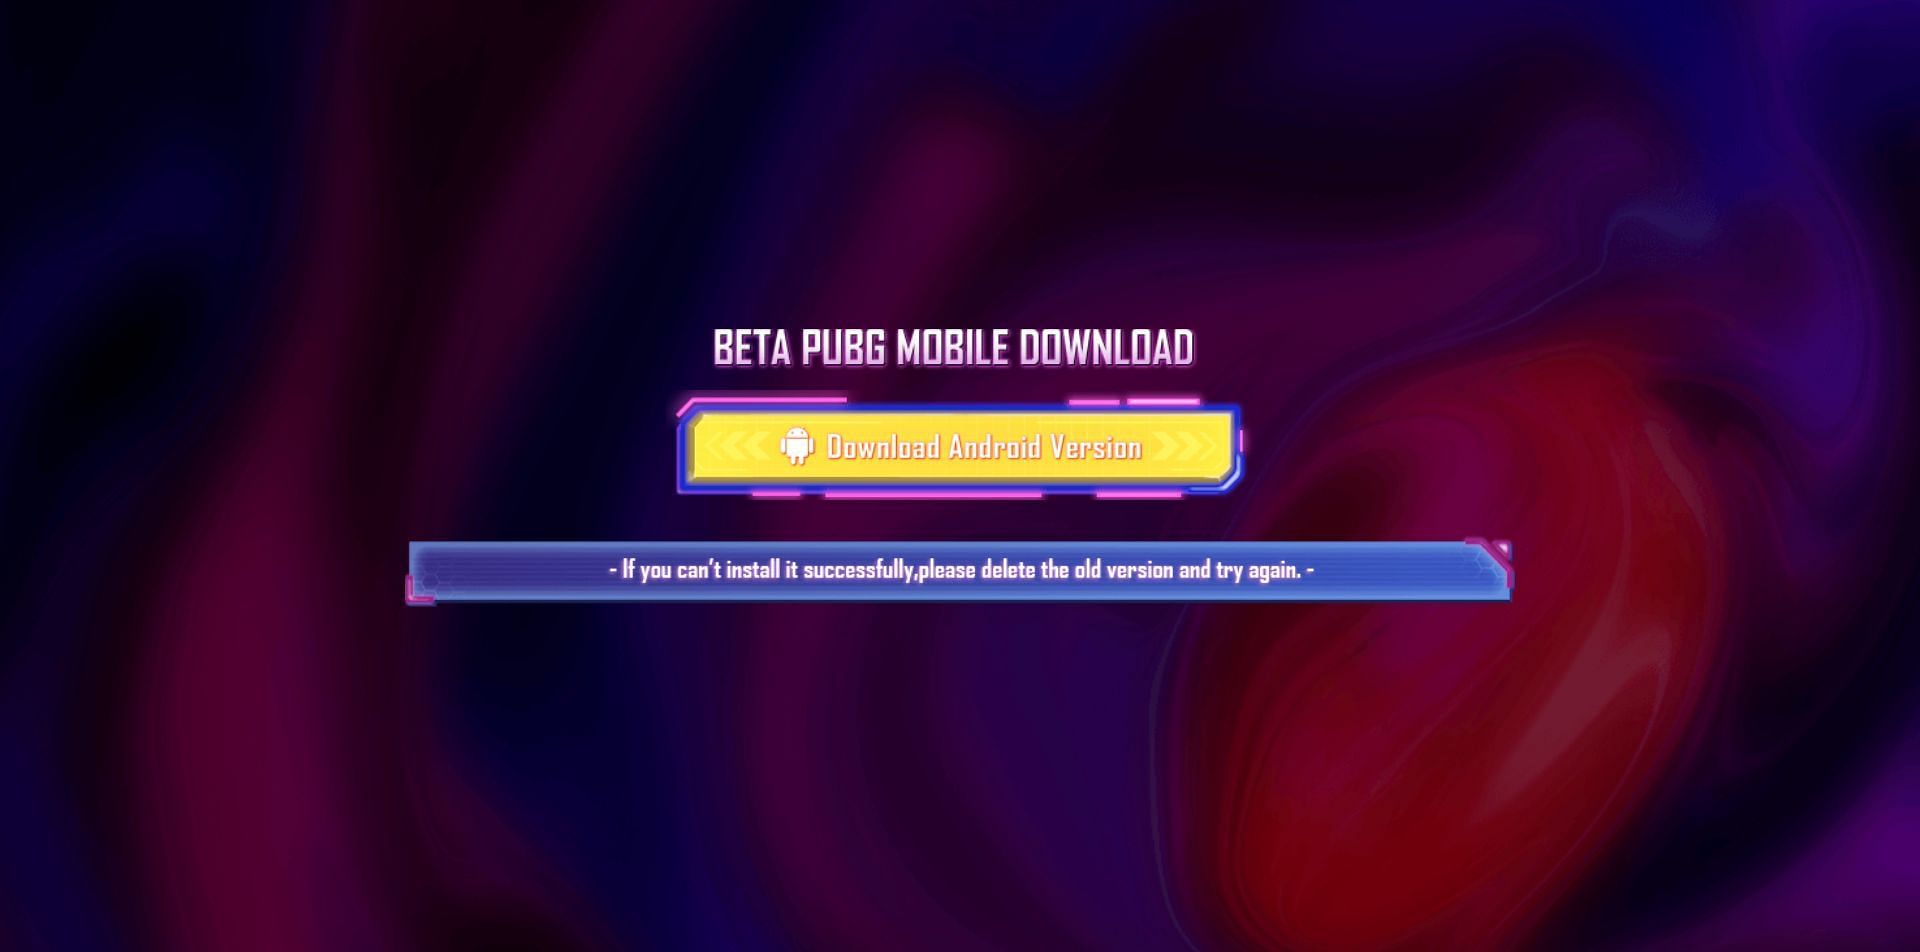 How to download the latest PUBG Mobile beta and a list of the latest features